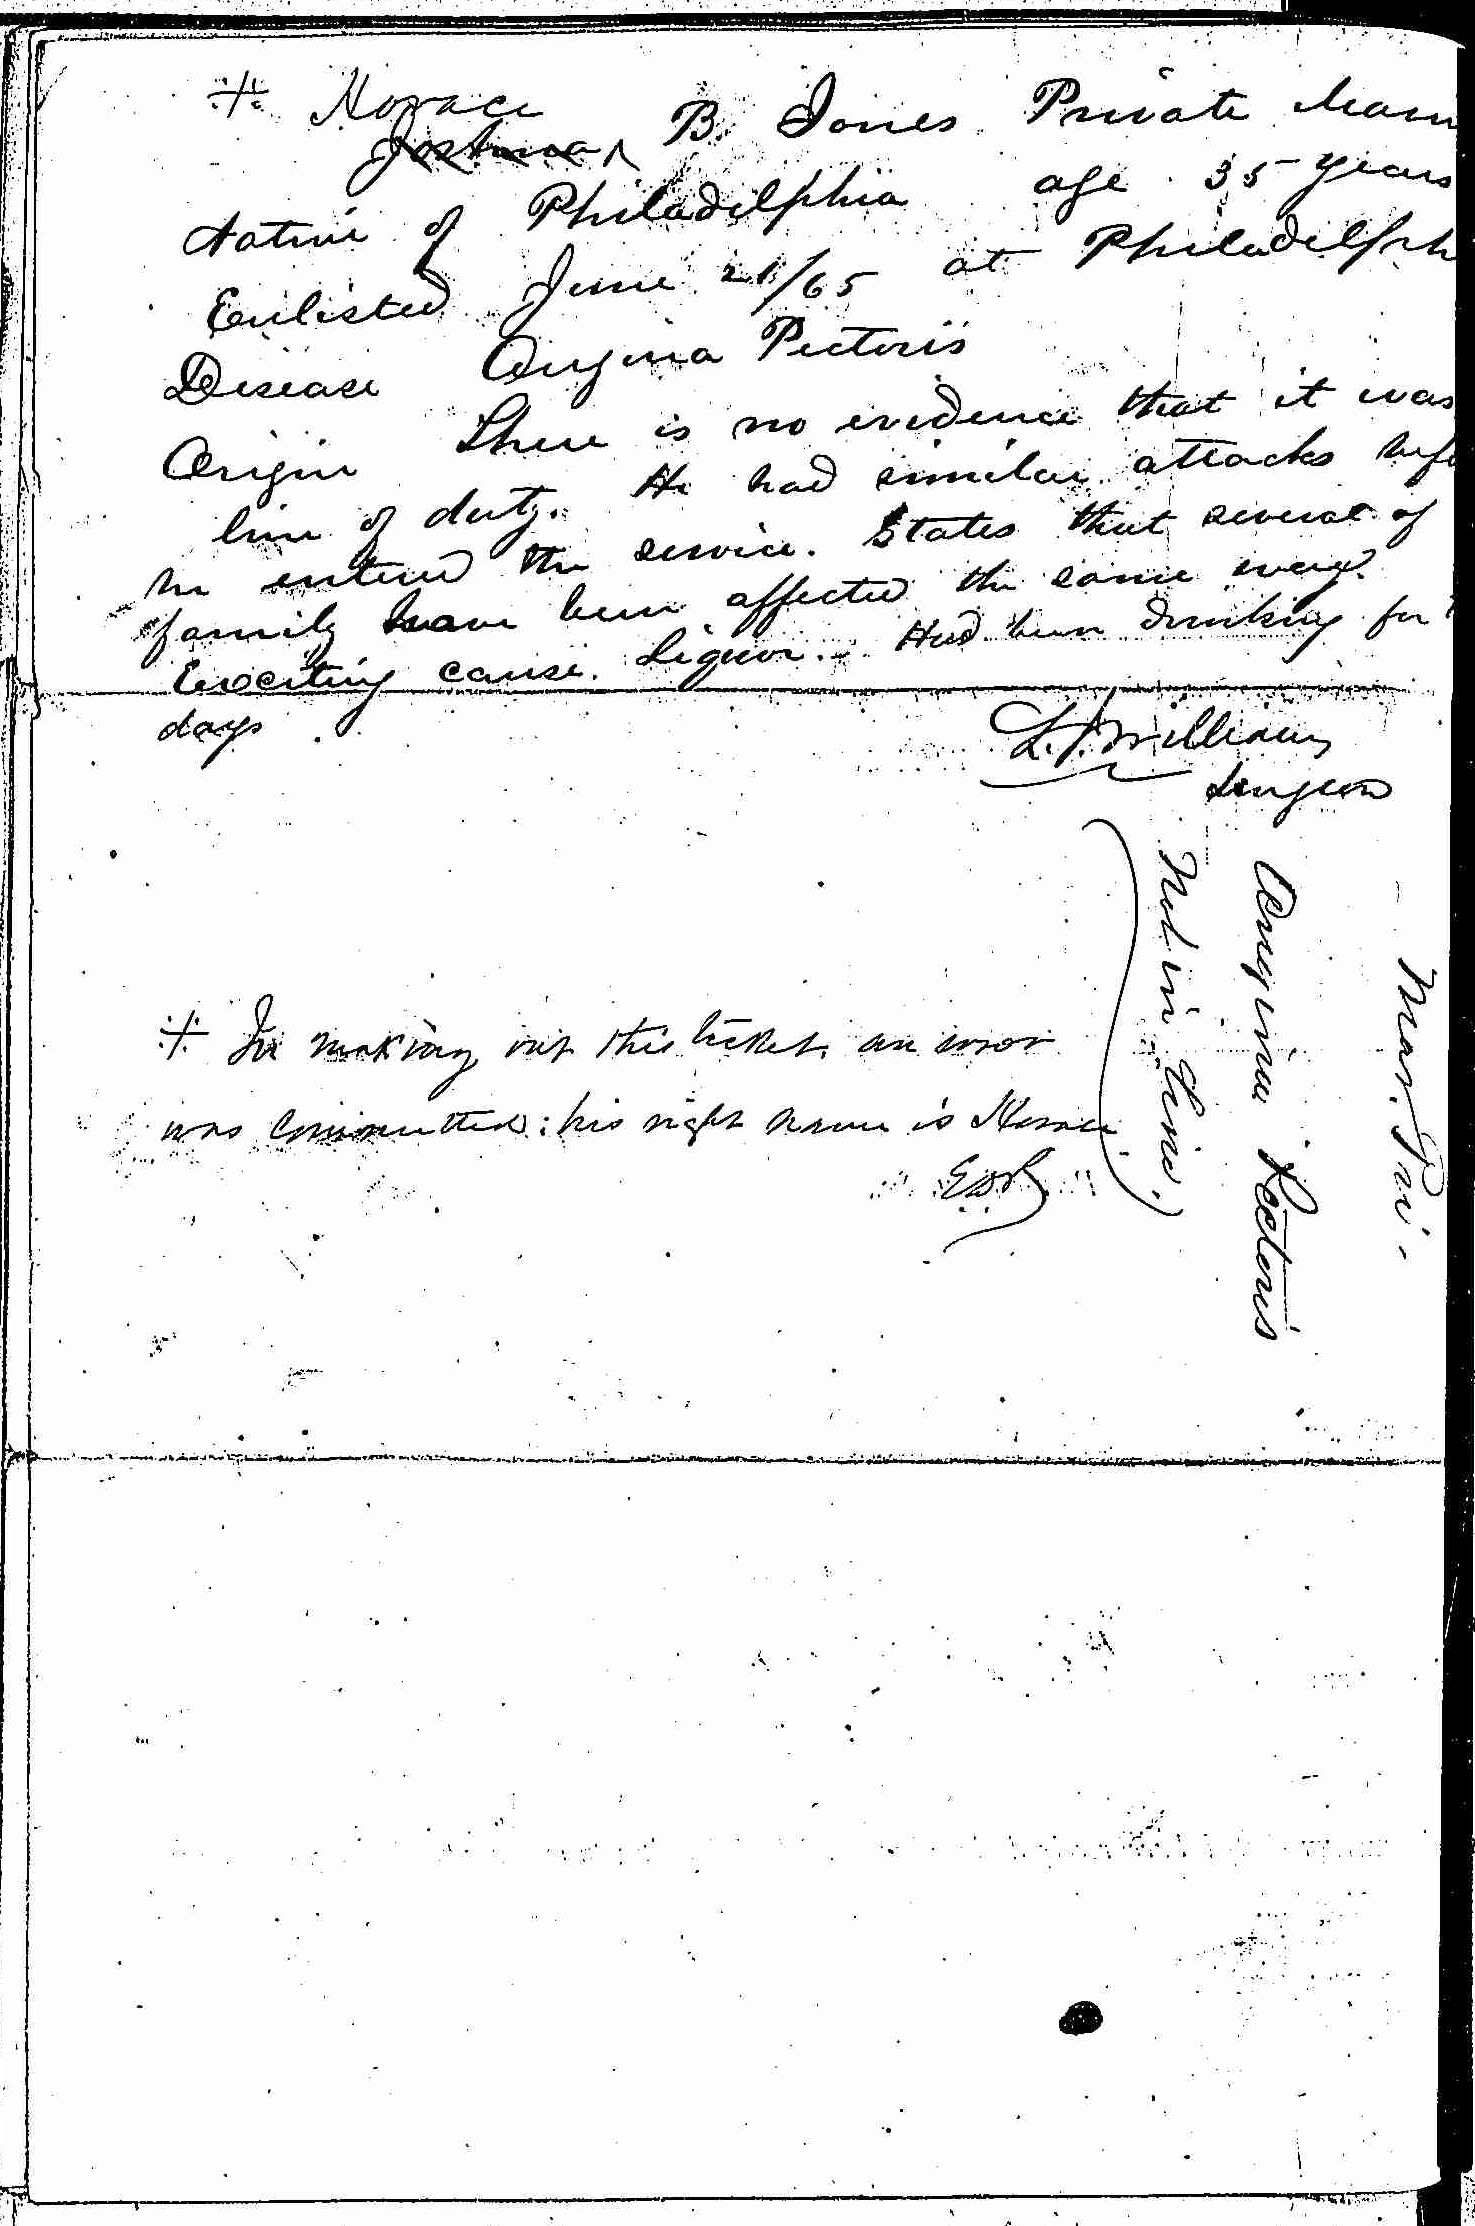 Entry for Joshua B. Jones (page 4 of 4) in the log Hospital Tickets and Case Papers - Naval Hospital - Washington, D.C. - 1866-68